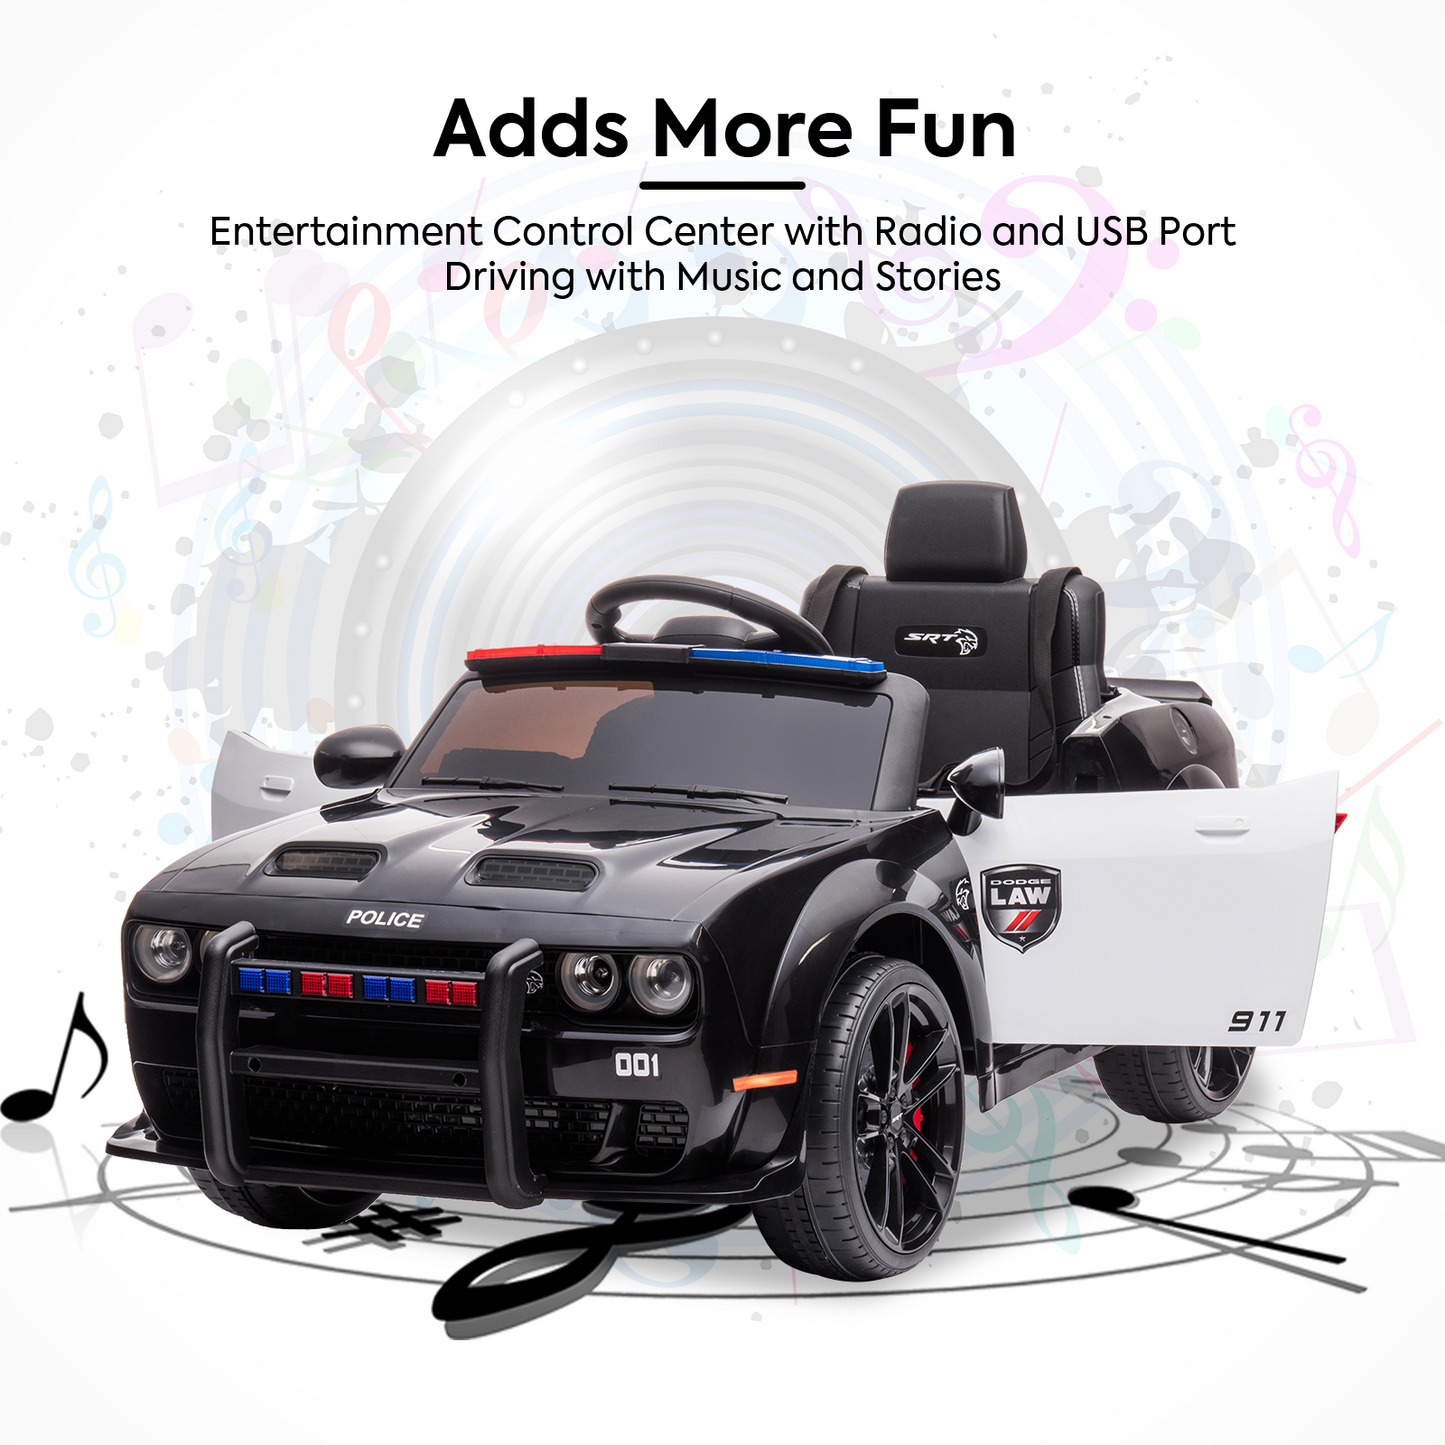 SYNGAR 12V Powered Ride on Police Car, Licensed Dodge Challenger Kids Ride On Toys with Patental Remote Control, LED Lights and Horn, Battery Operated Electric Vehicles Black, LJ1556